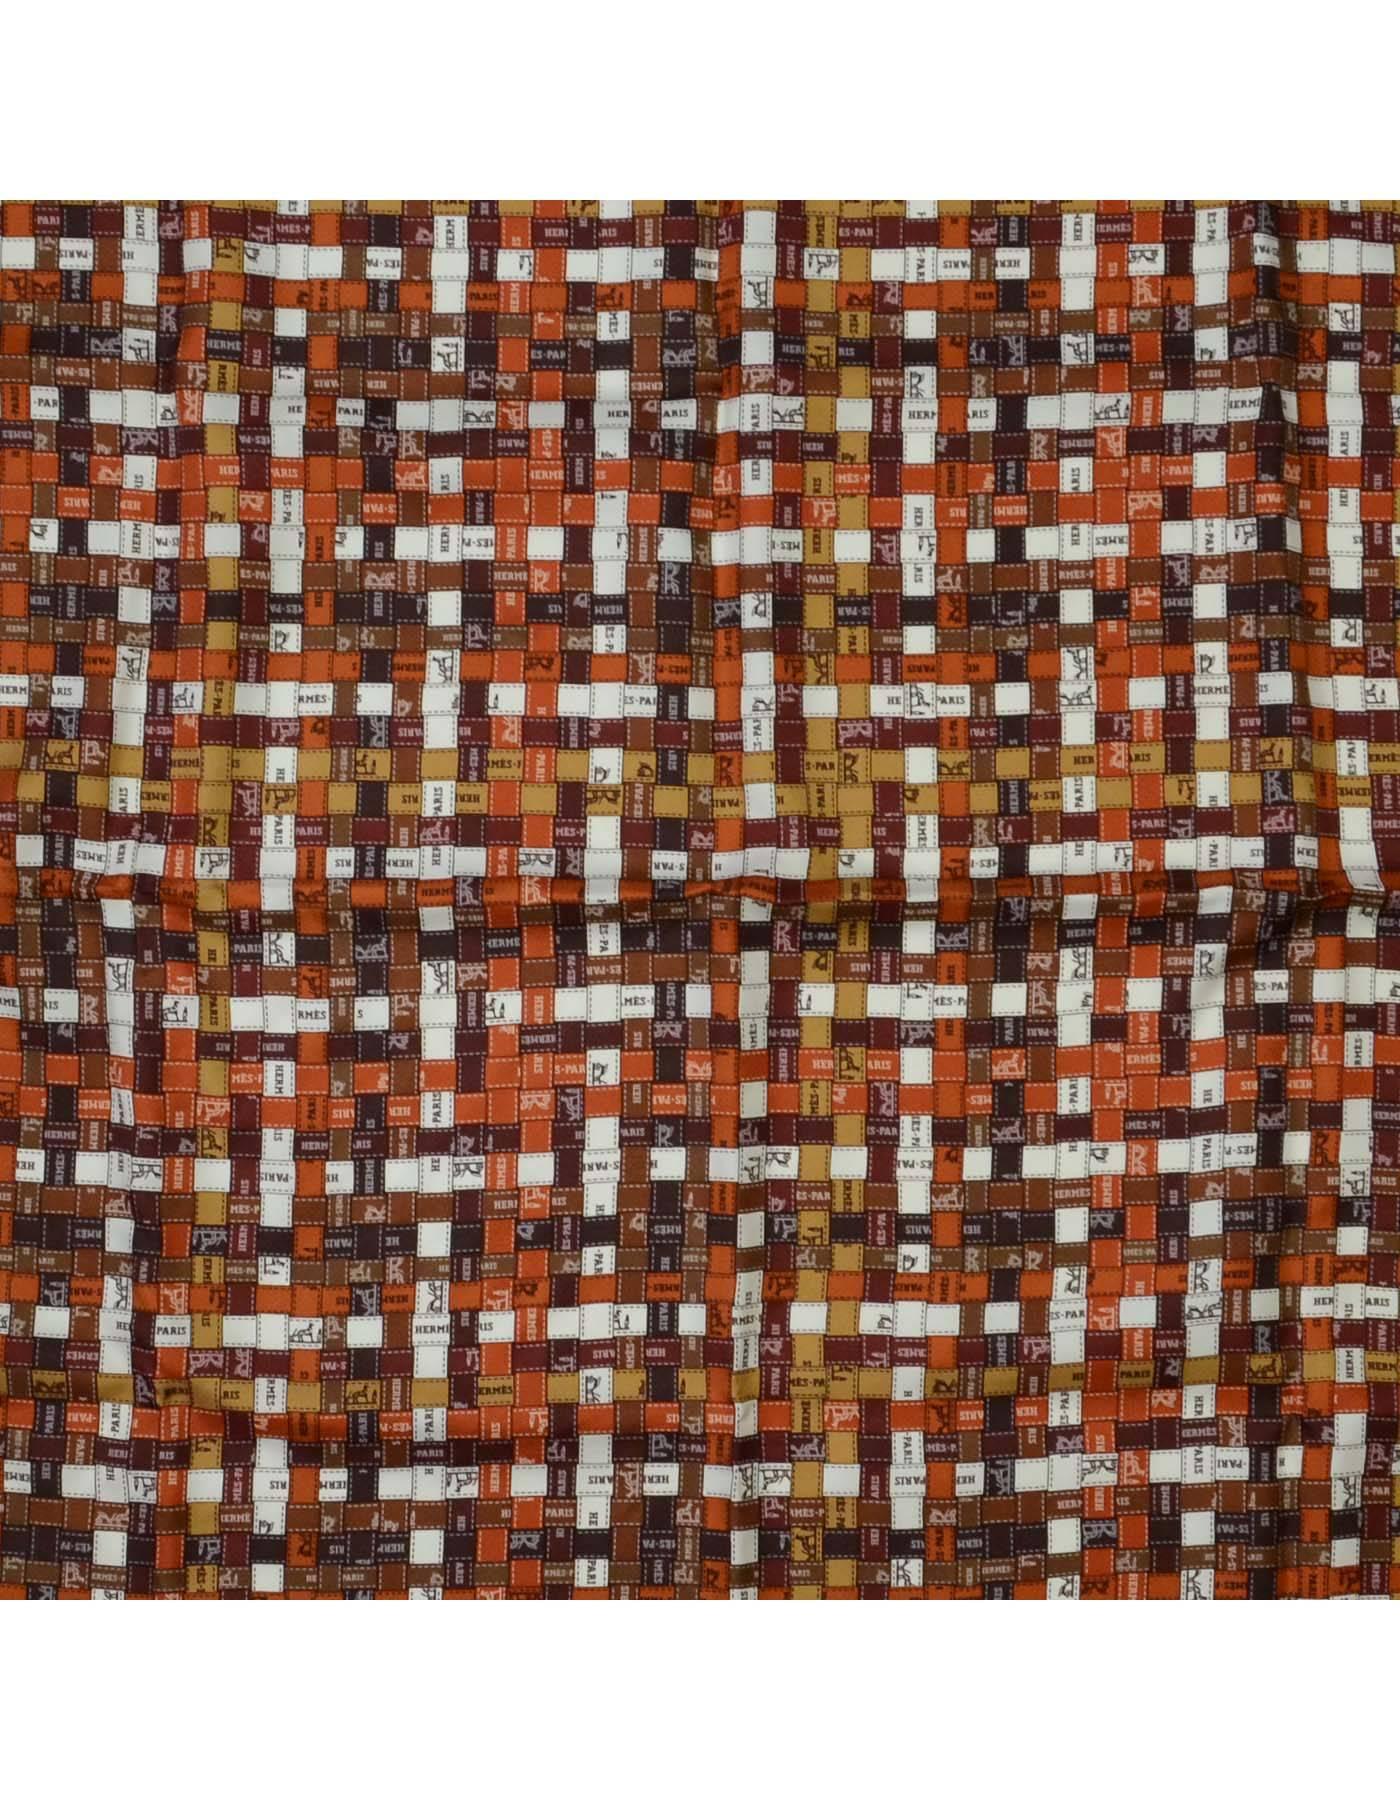 Hermes Brown 'Bolduc au Carre' Silk 90cm Scarf
Print features brown, rust and white woven Hermes ribbon.

    Made in: France
    Color: Brown, rust, beige and white
    Composition: 100% Silk
    Includes: Hermes box
    Overall Condition: